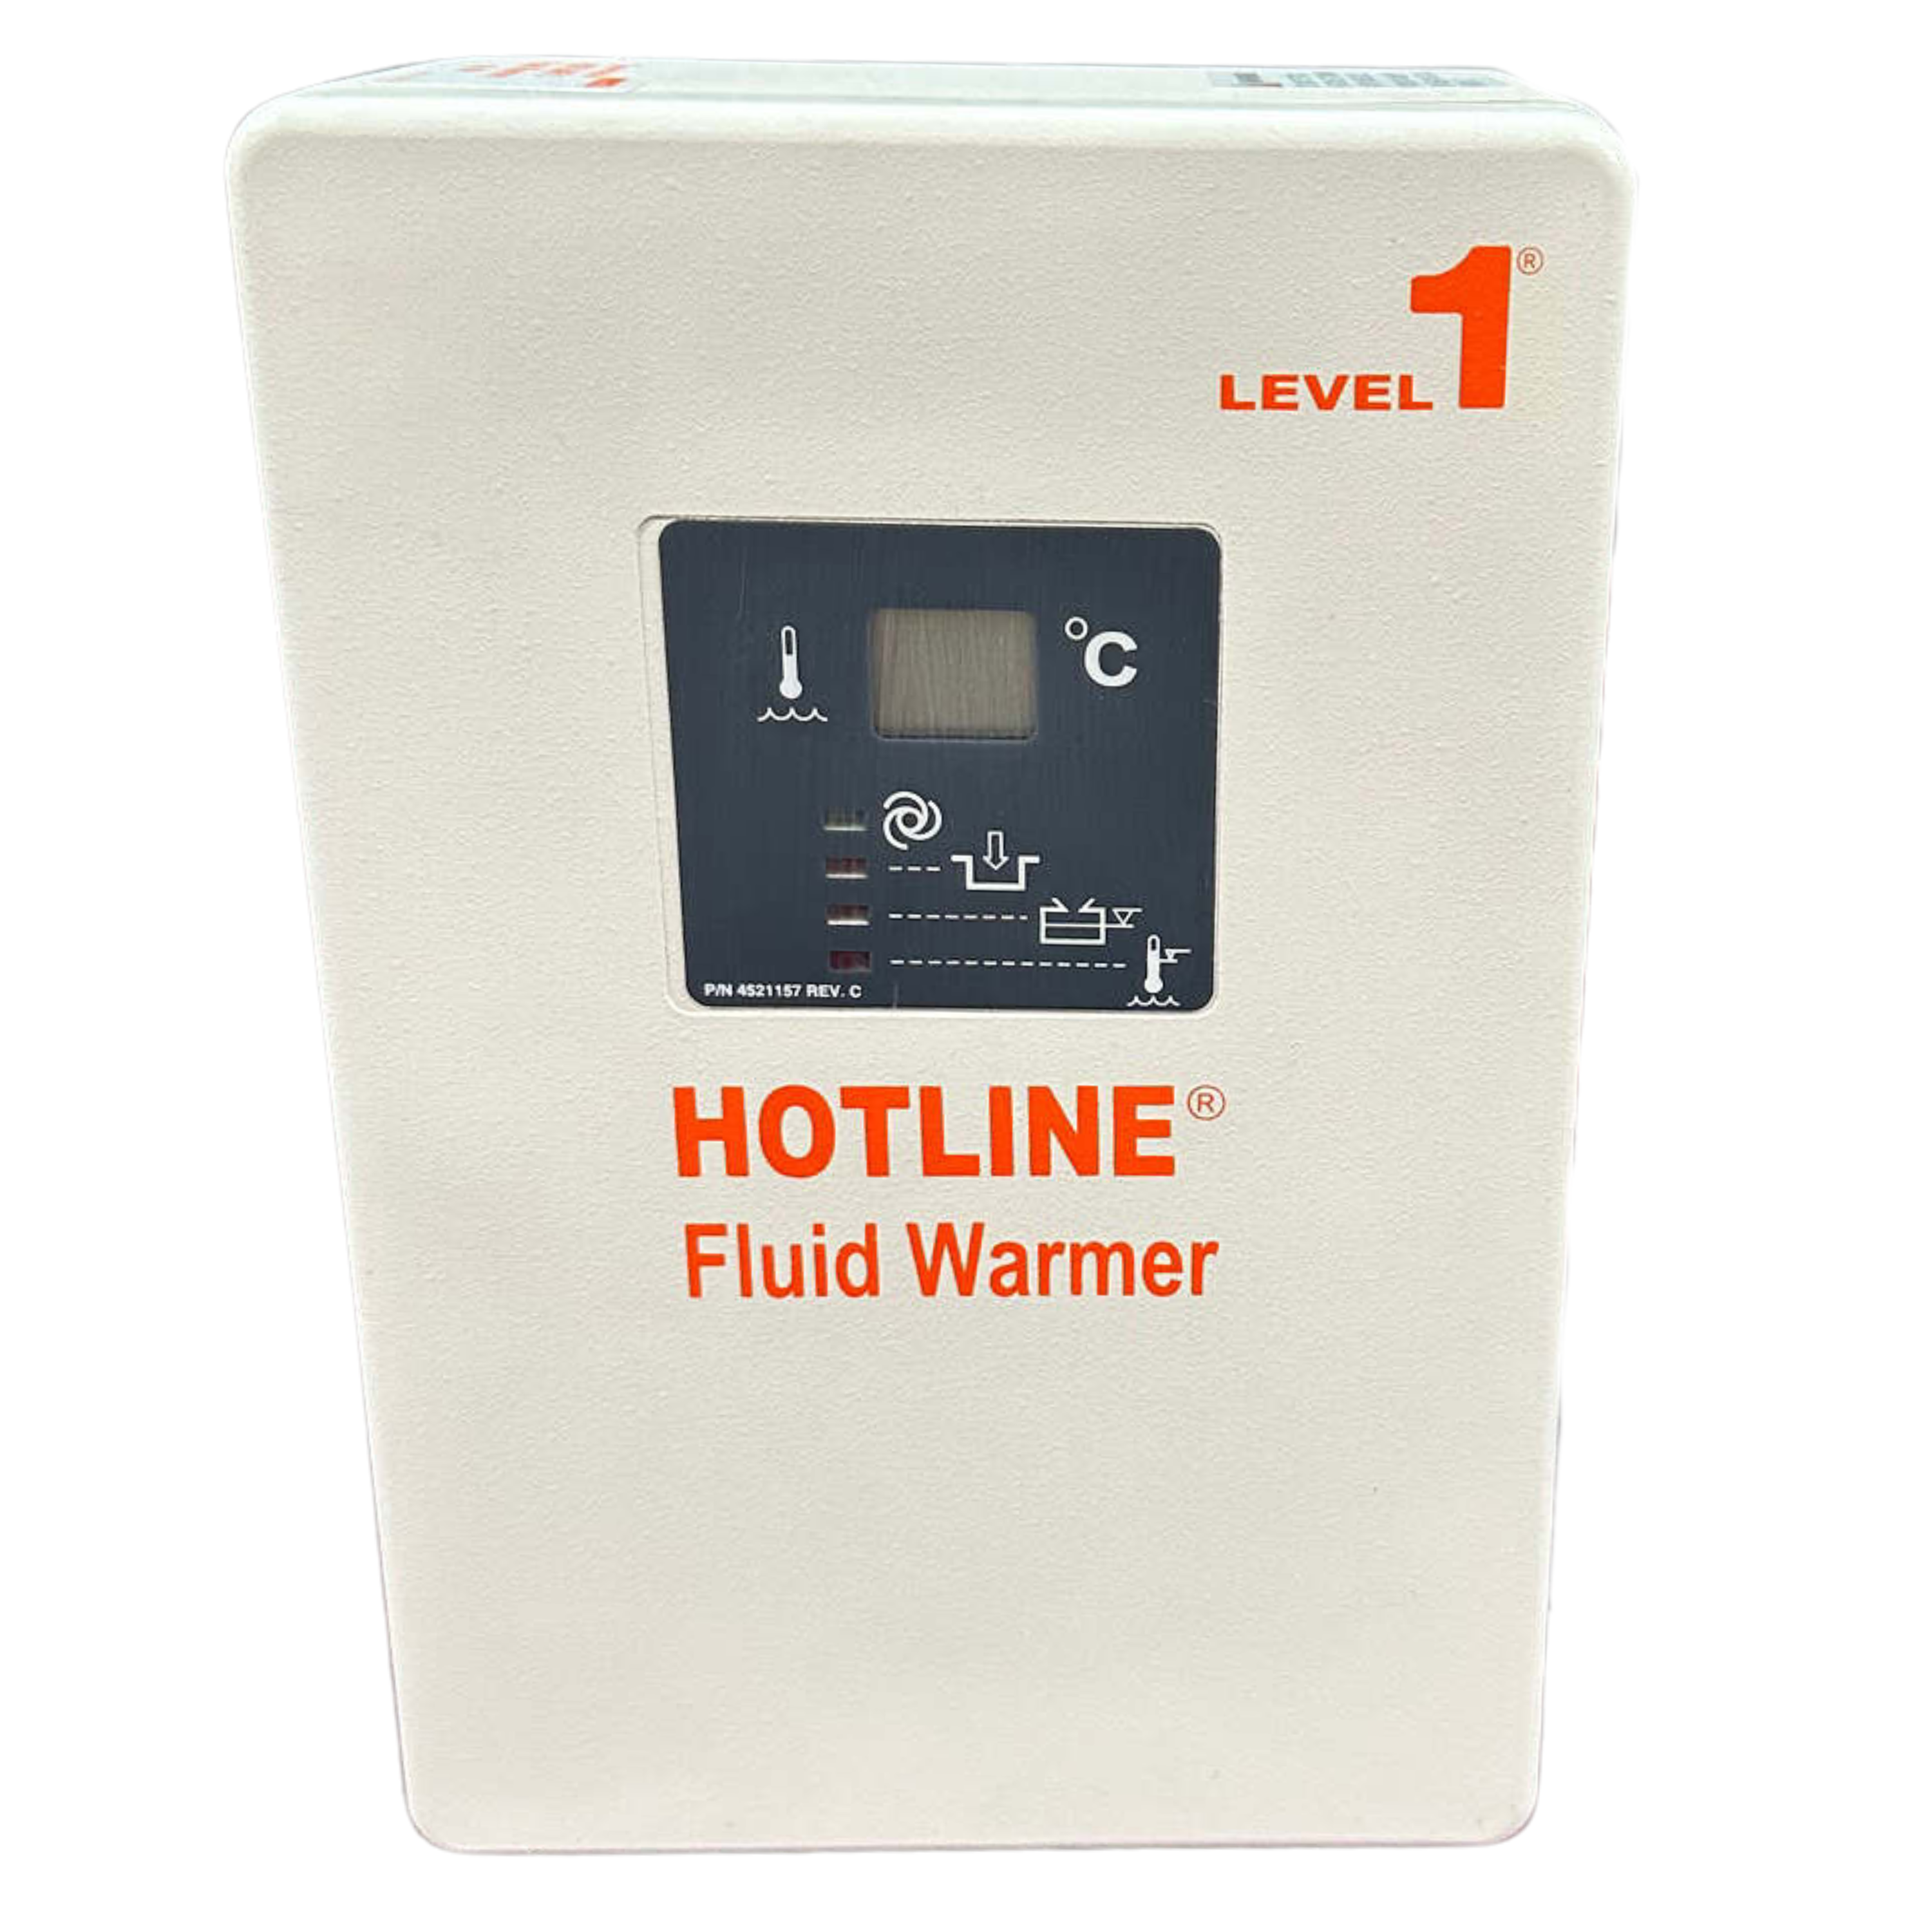 Heat Therapy & Fluid Warmers